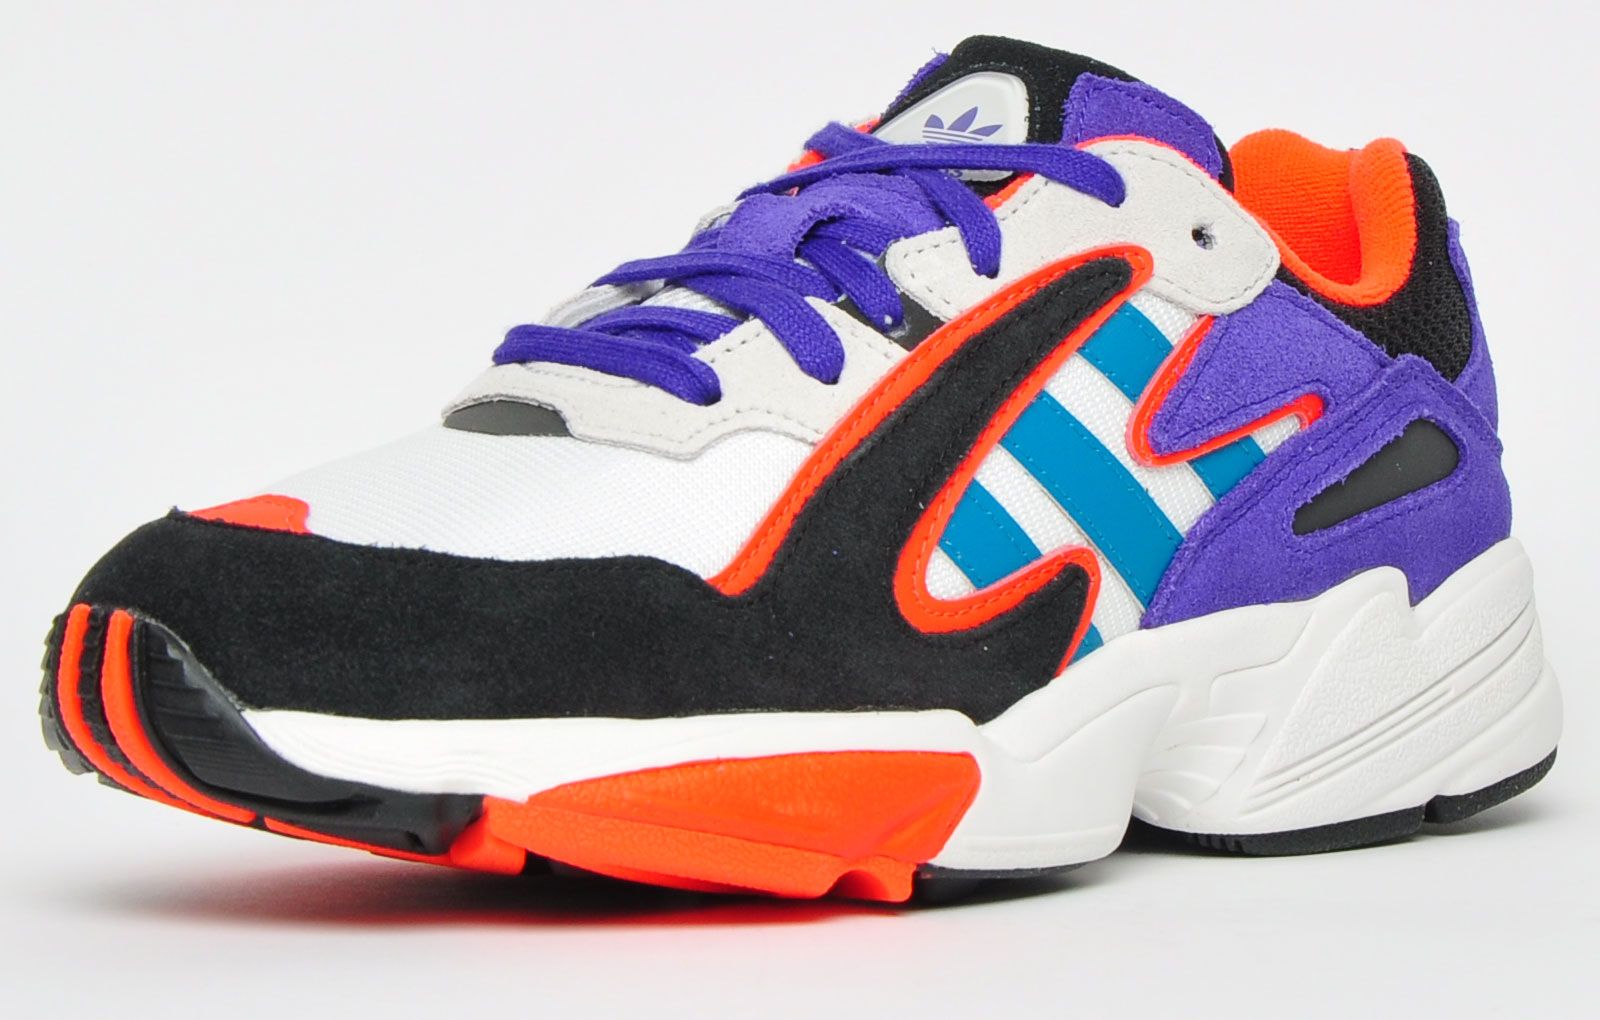 A love for 1990’s fashion gives the Yung-96 an on trend bold look with a thick set silhouette that’s distinctly 90s <p>Featuring layered panels of mesh and nubuck leather with a lightweight Eva midsole utilizing a Torsion system X-bar on its mid shank for stability</p> <p>This vintage runner-influenced model is constructed with a layered upper with its signature three stripes incorporated onto each side, sitting on a white highly cushioned midsole, detailing is added with the signature Adidas Originals trefoil logo to the tongue and heel.</p> <p>- Textile and nubuck leather mix upper</p> <p>- Eva cushioned midsole</p> <p>- Torsion system for midfoot stability</p> <p>- Padded heel and ankle collar</p> <p>- Durable carbon rubber outsole</p> <p>- Adidas Originals branding throughout</p>